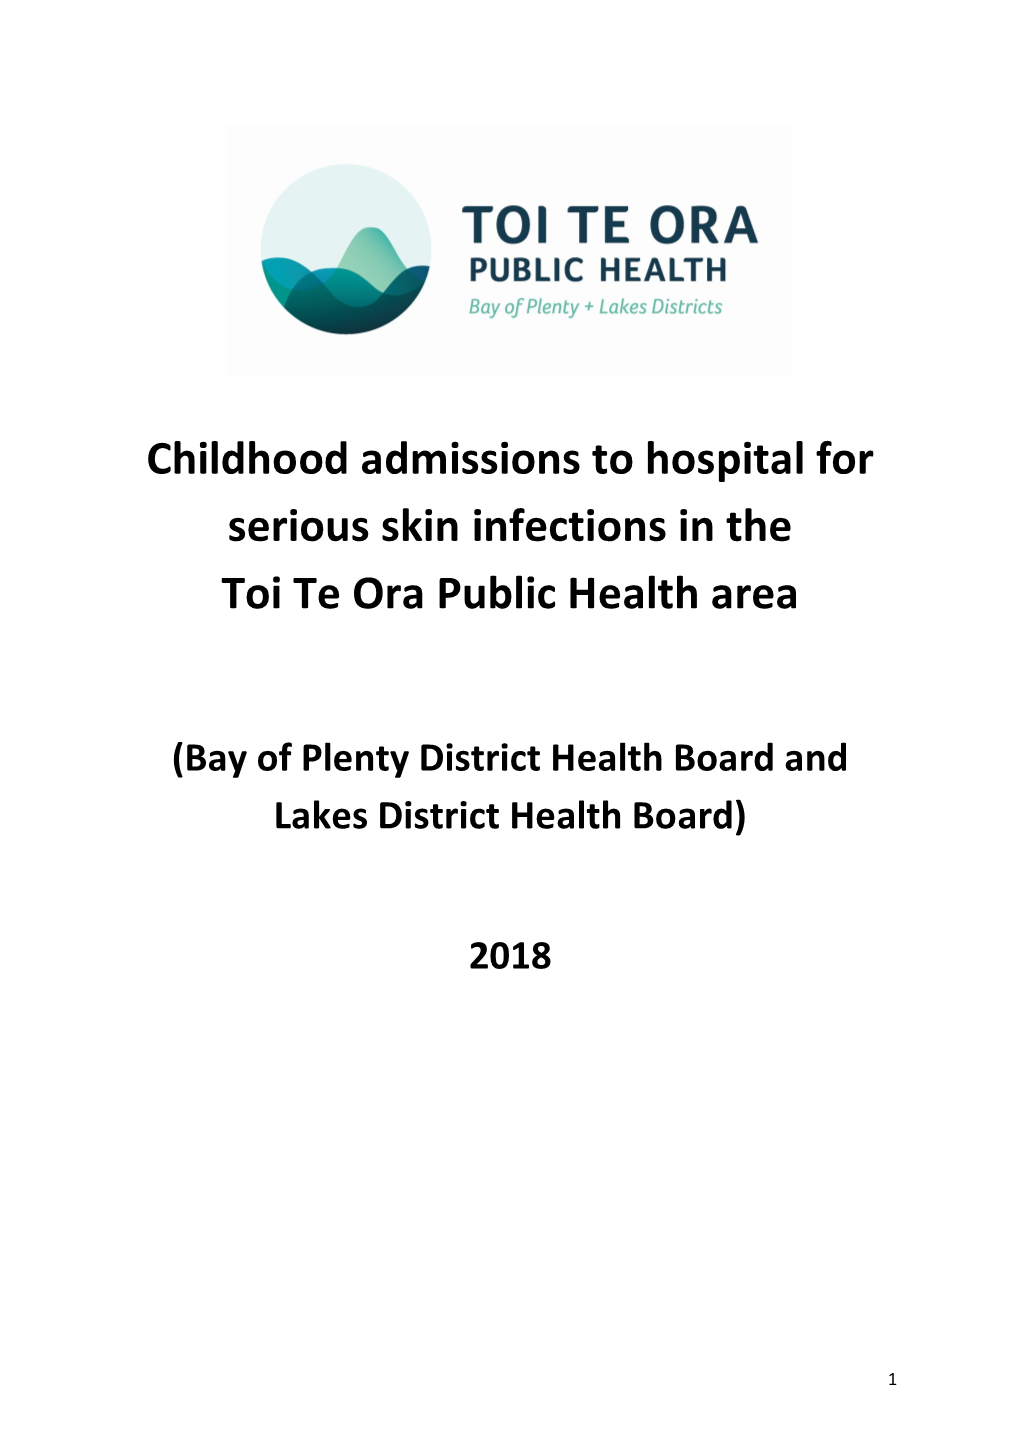 Childhood Admissions to Hospital for Serious Skin Infections in the Toi Te Ora Public Health Area